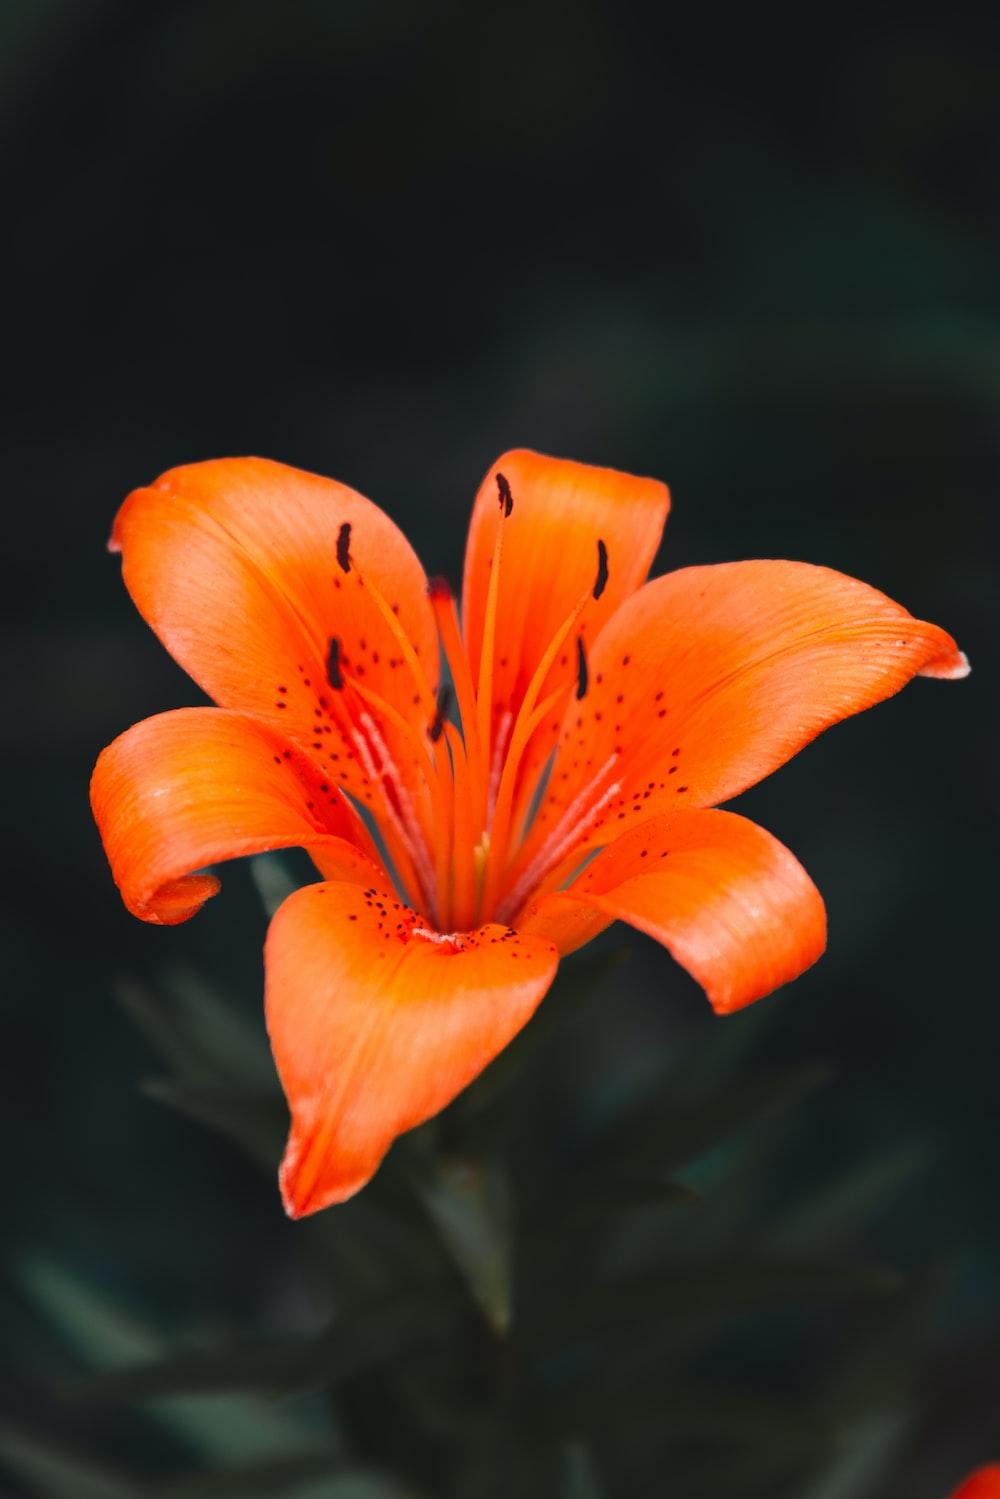 A close up of an orange flower with a black background photo